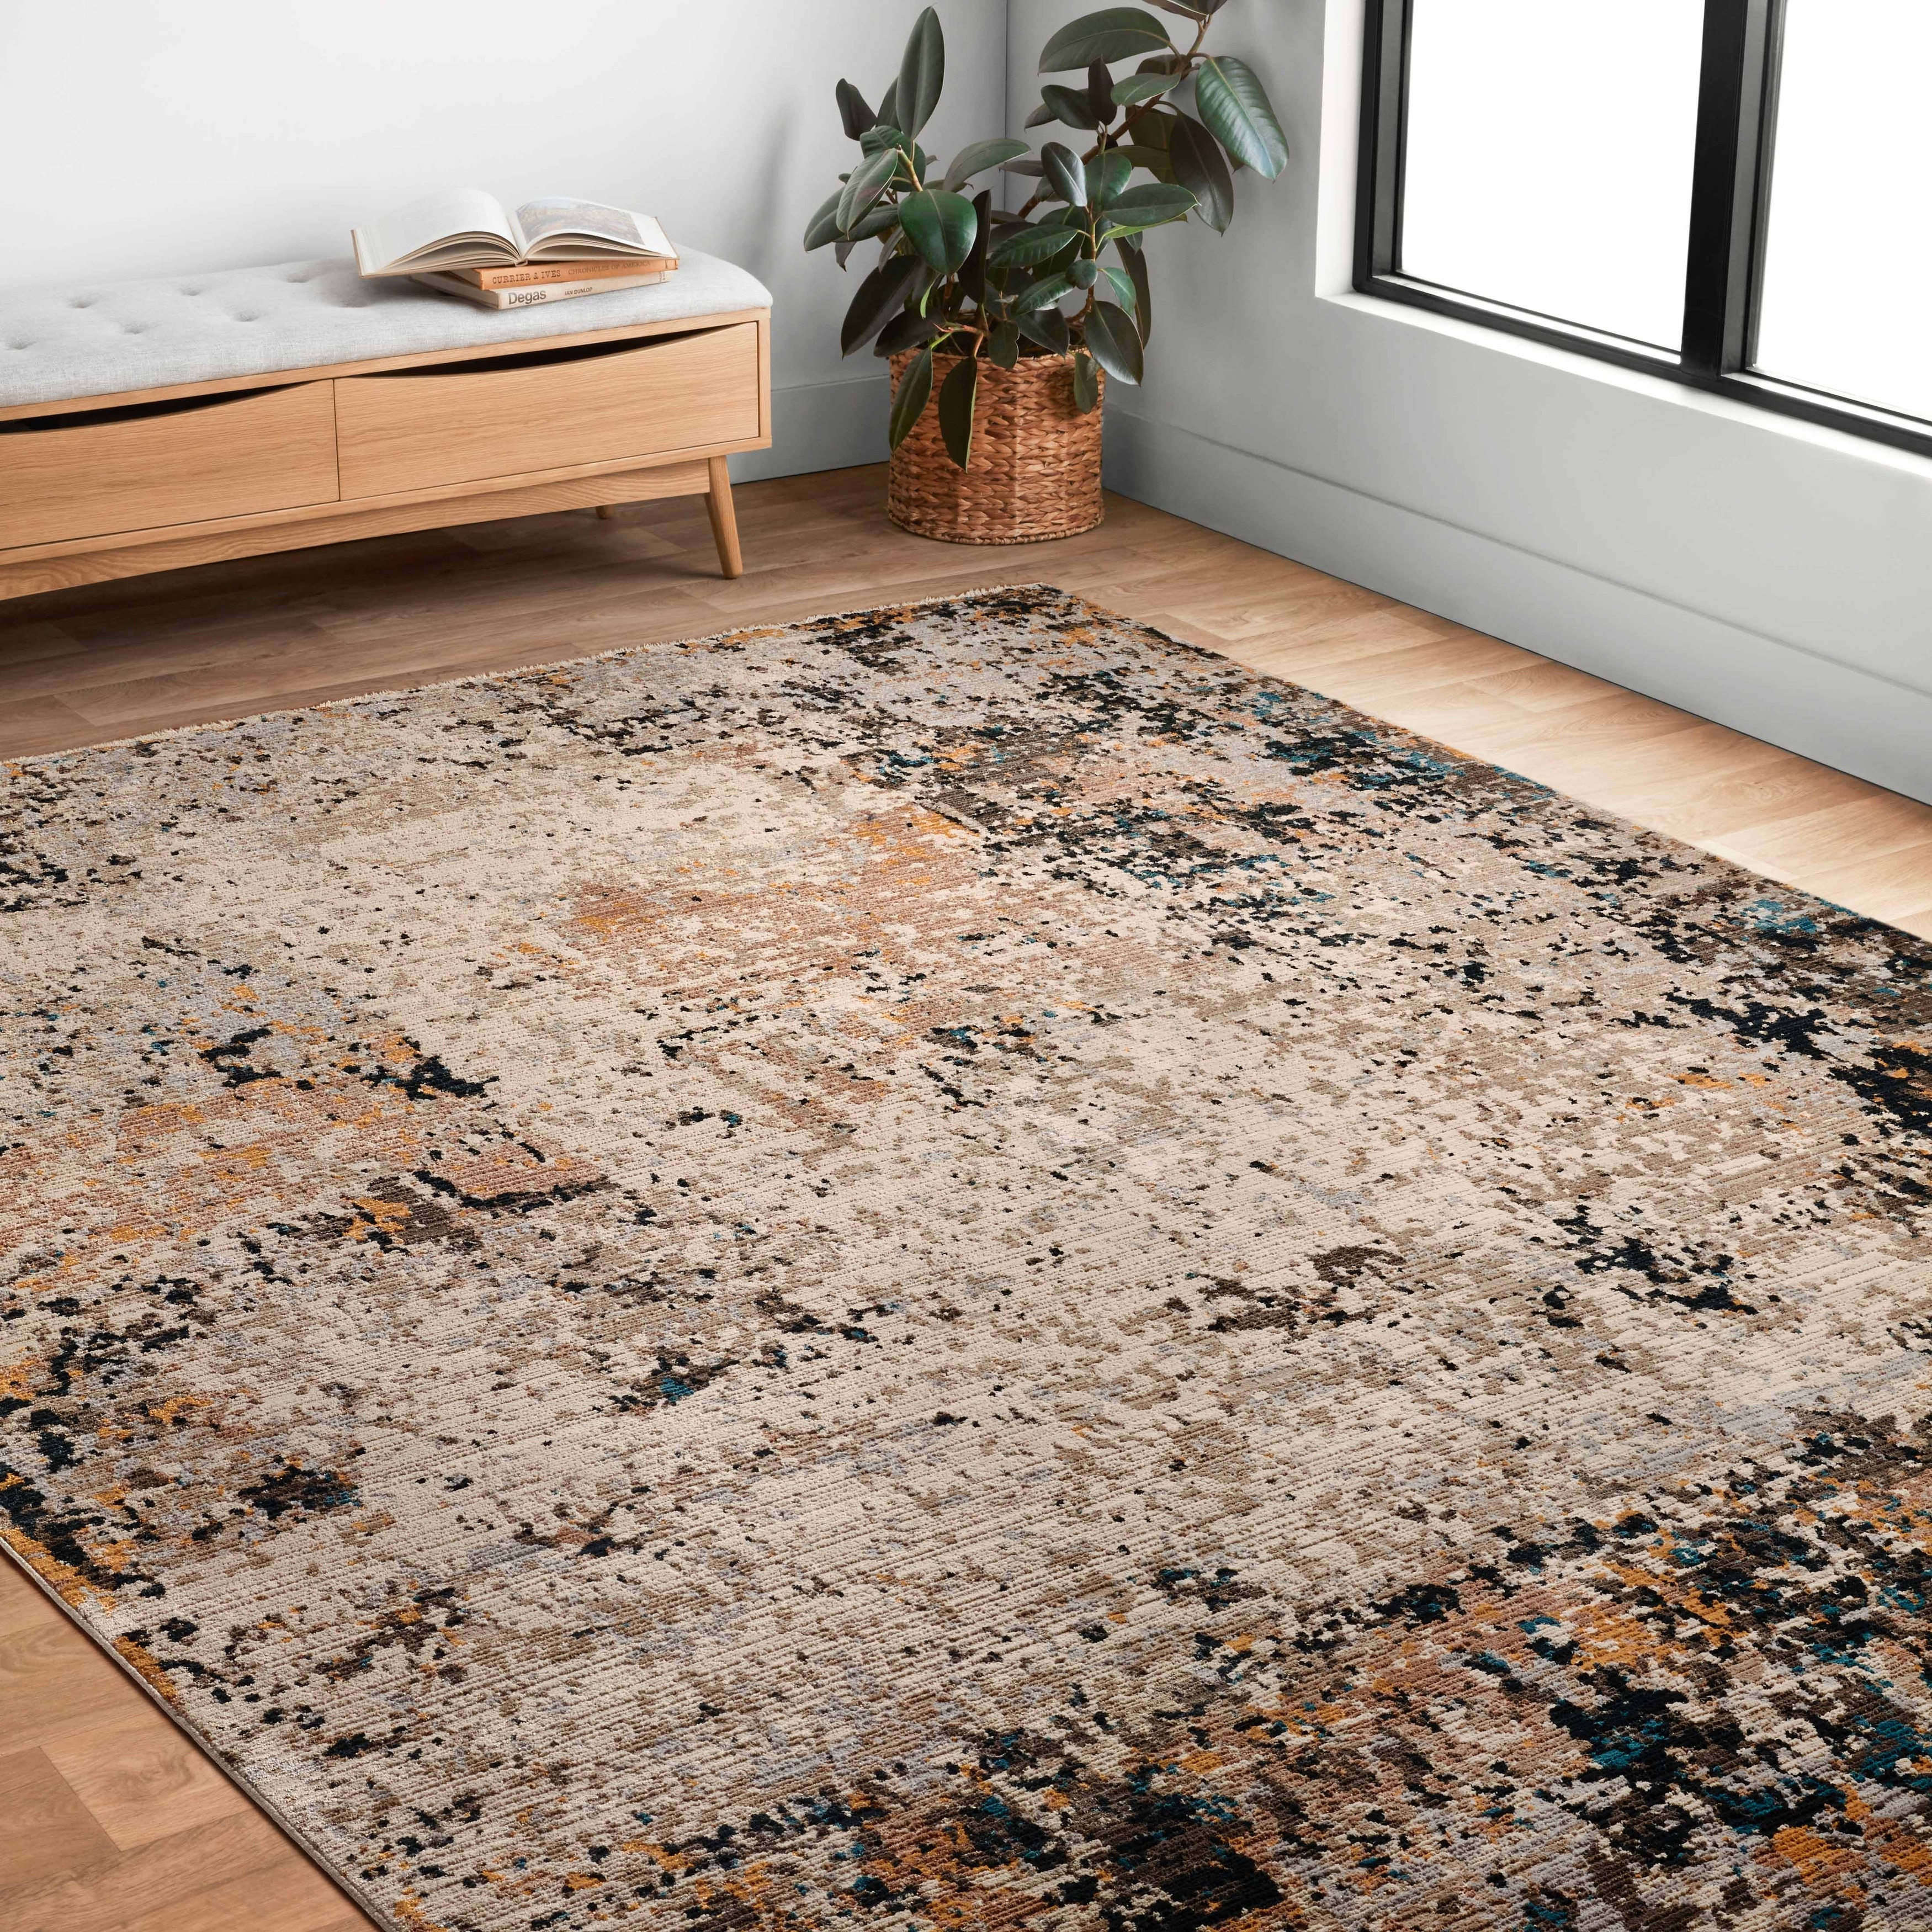 https://ak1.ostkcdn.com/images/products/is/images/direct/f9d7ef811c673b2d5df4f2659abd58ba3535330f/Alexander-Home-Reese-Modern-Rustic-Abstract-Area-Rug.jpg